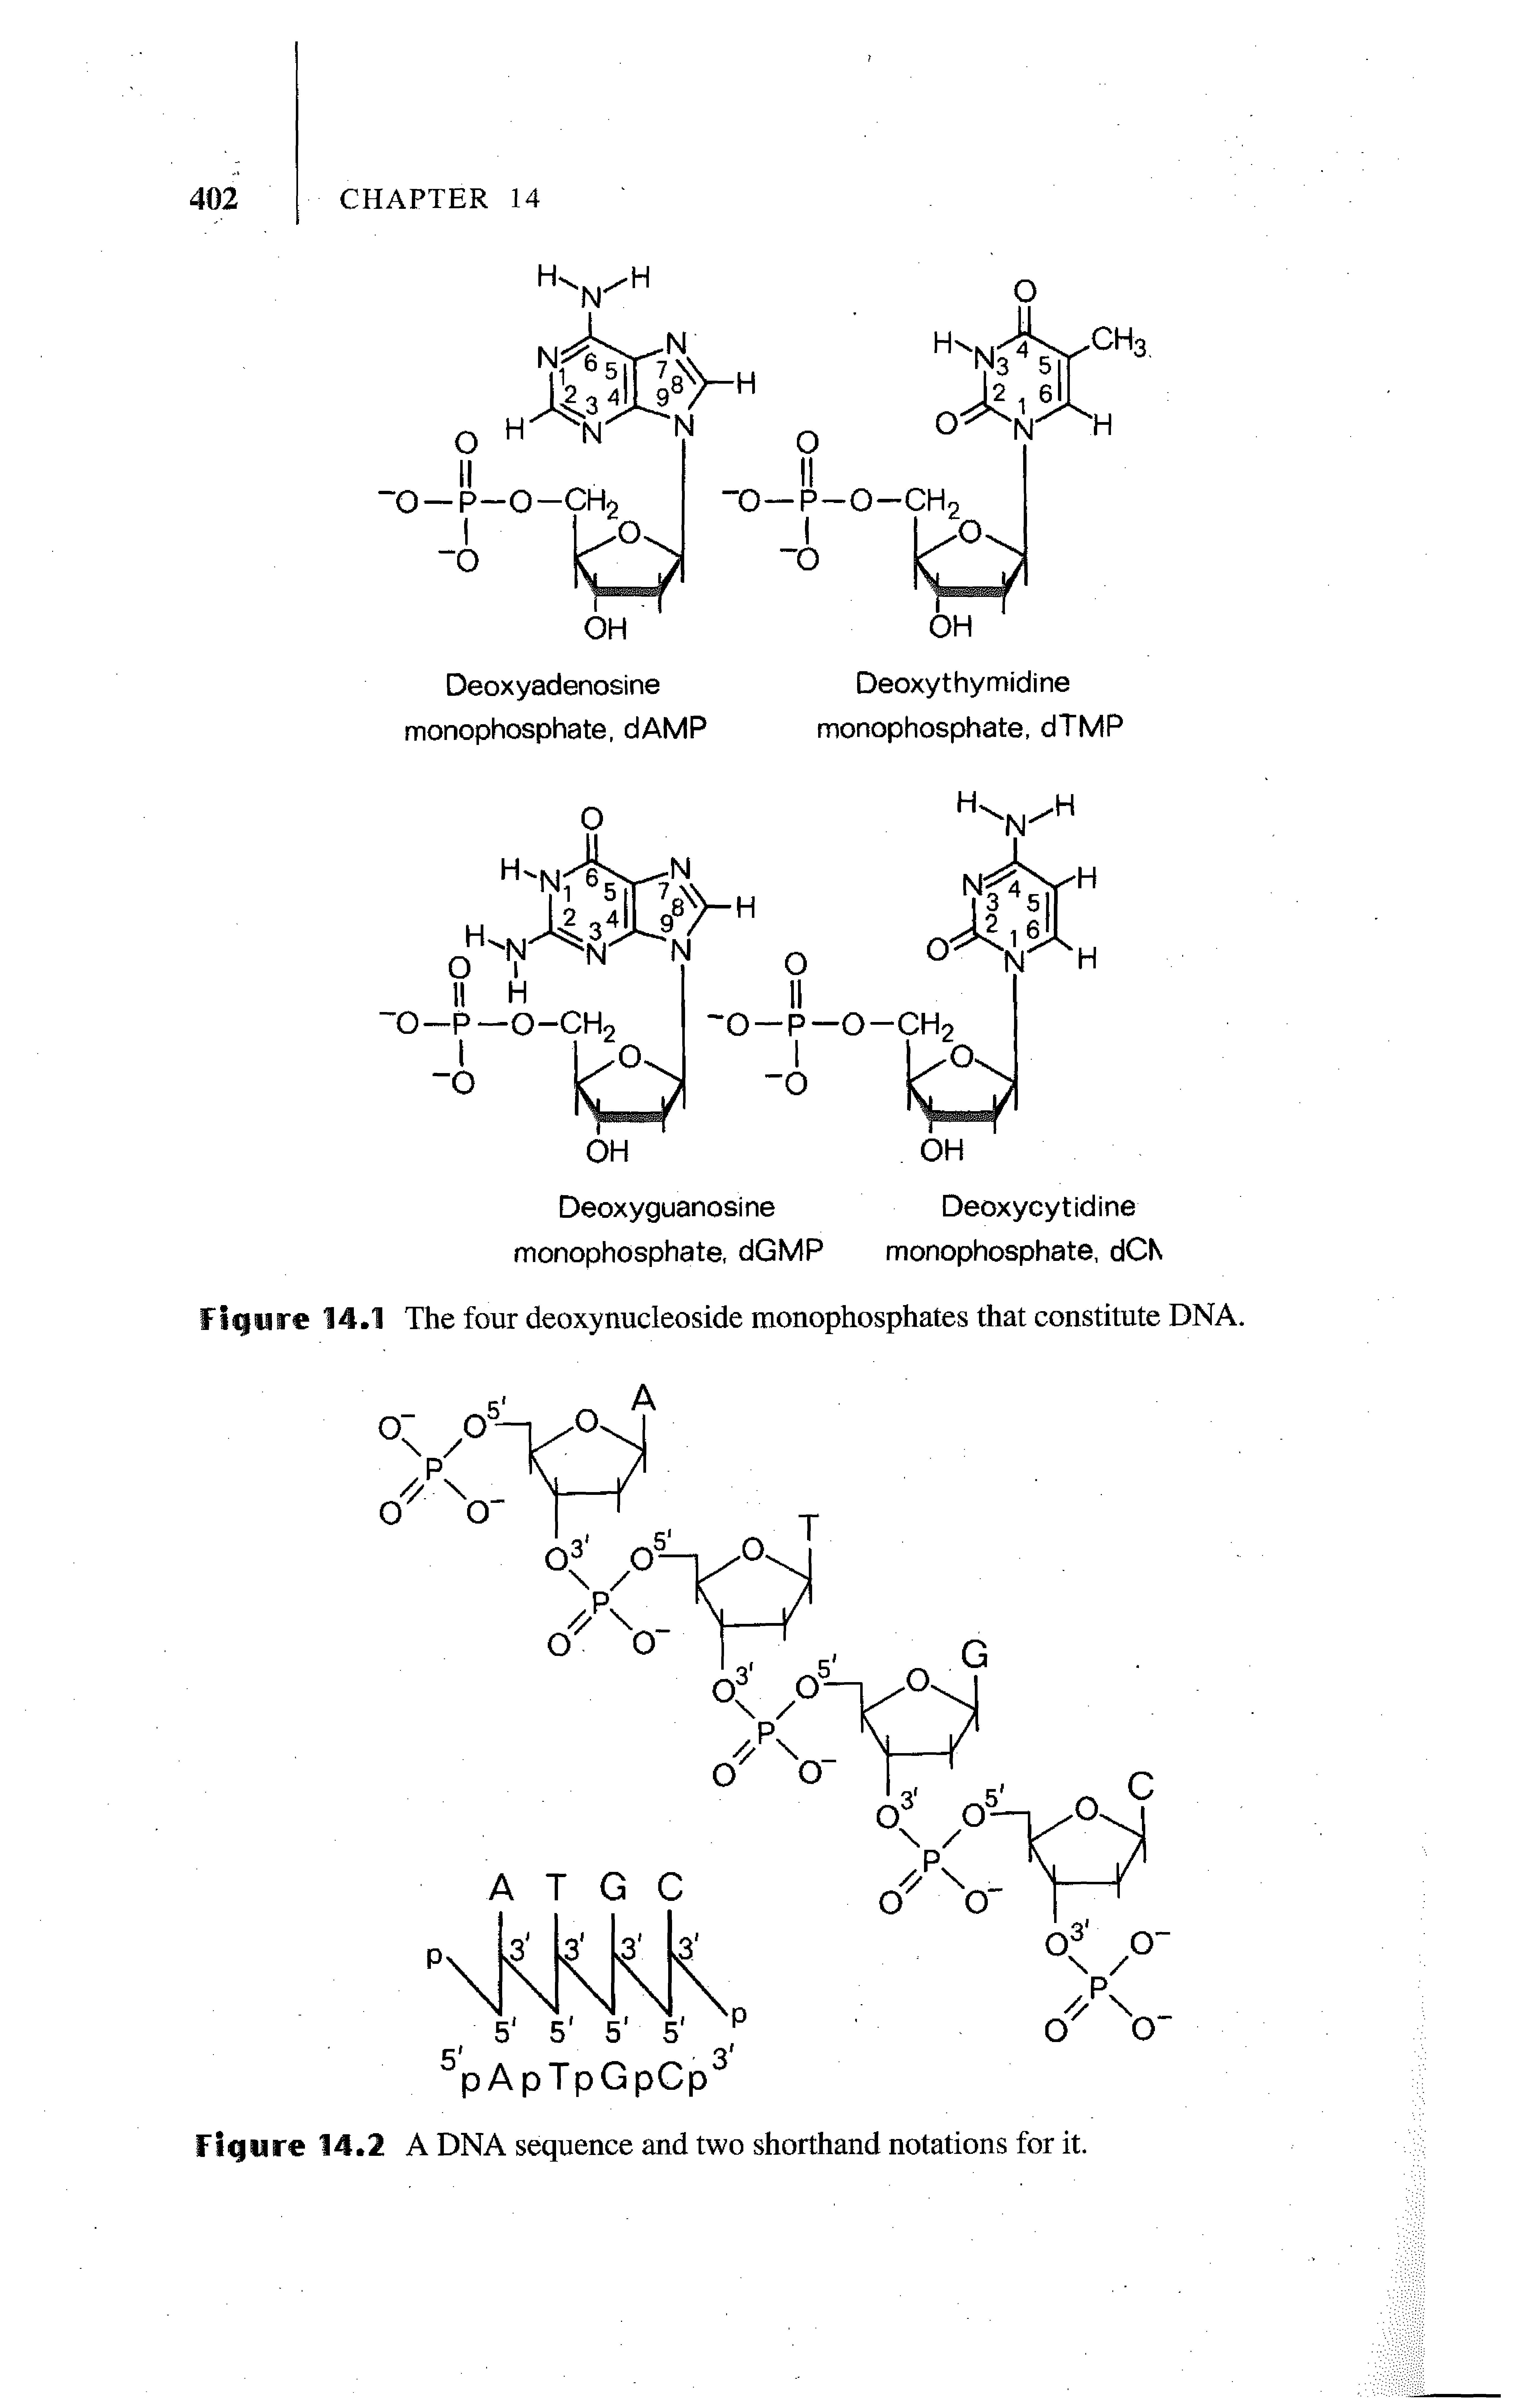 Figure 14.1 The four deoxynucleoside monophosphates that constitute DNA.